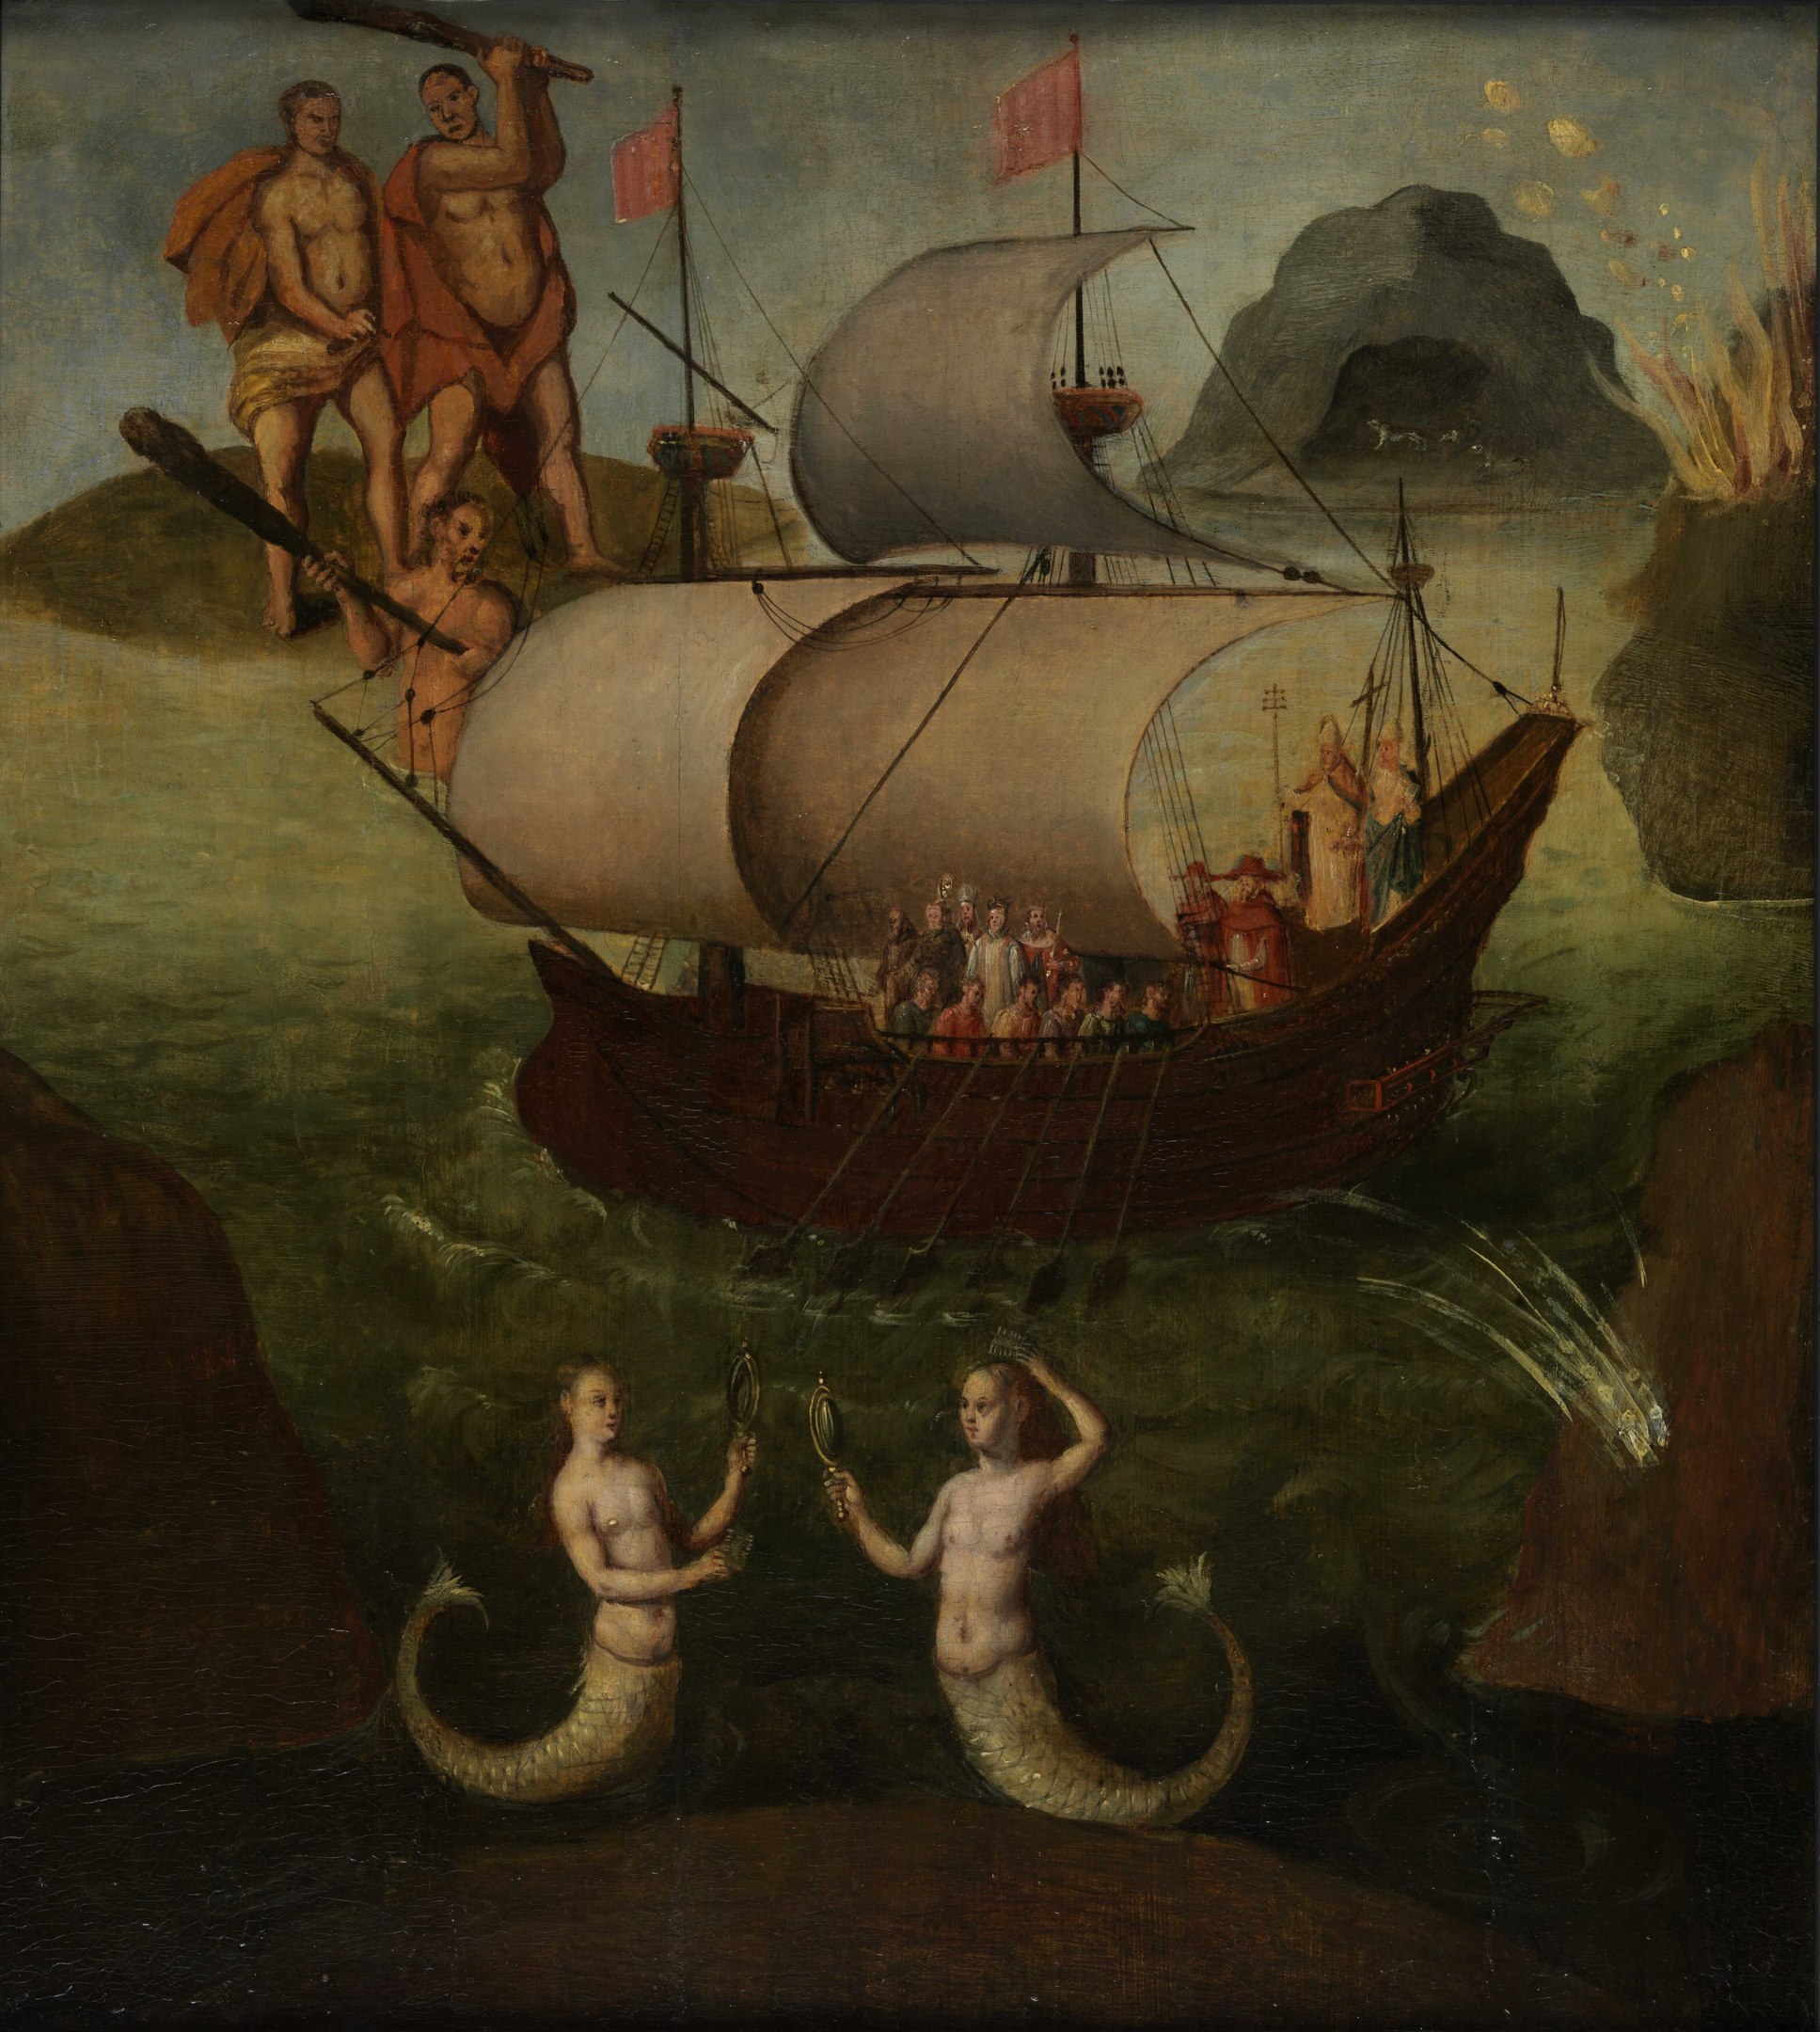 A ship carrying clergymen cruises through the ocean with a pair of mermaids and giants in the foreground and background respectively